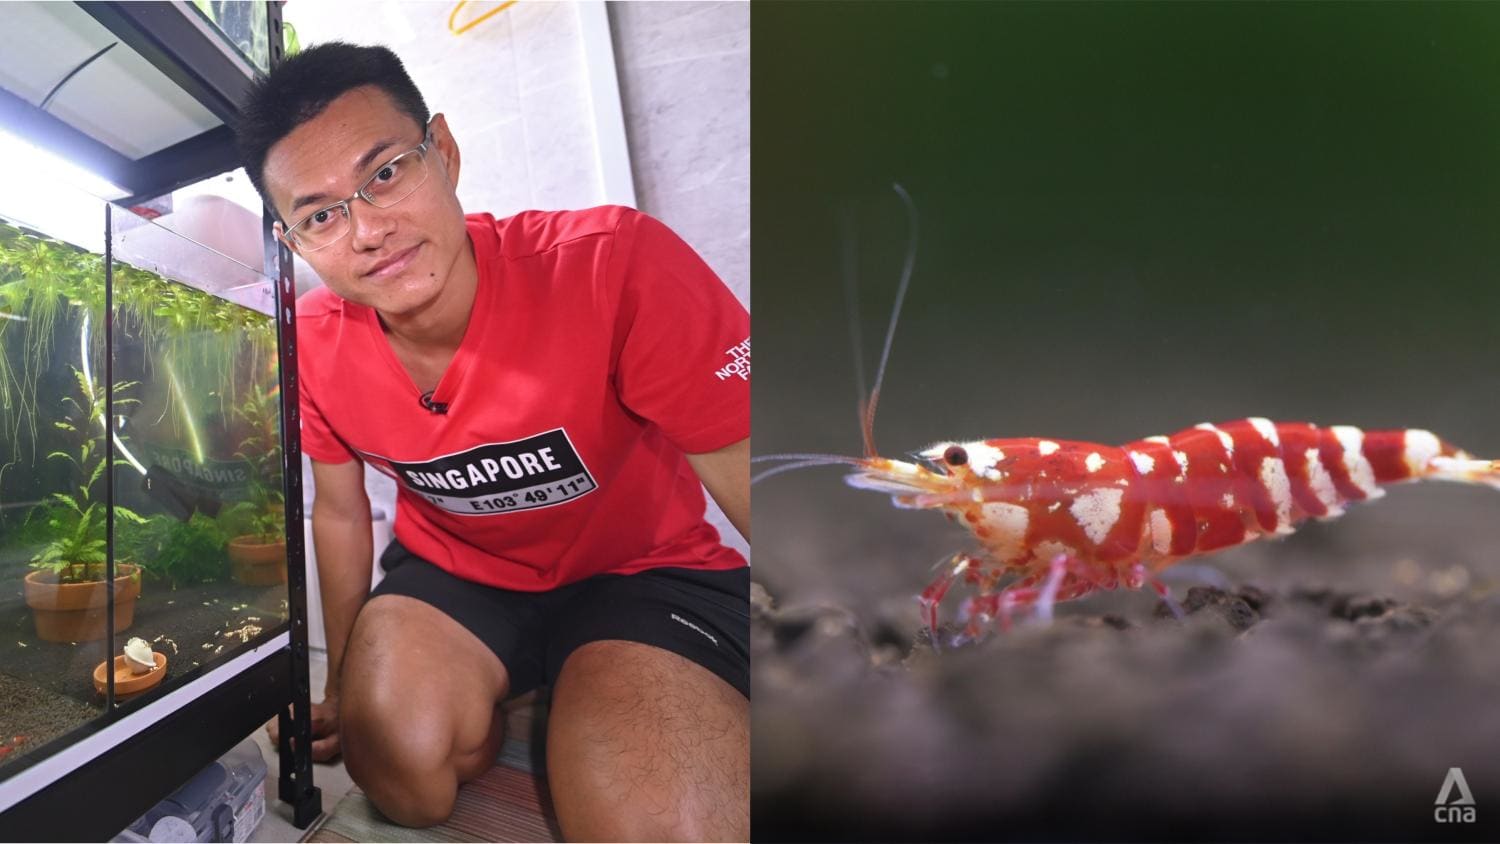 He’s a prawn star: Meet the ornamental shrimp hobbyist with a mission to educate and share